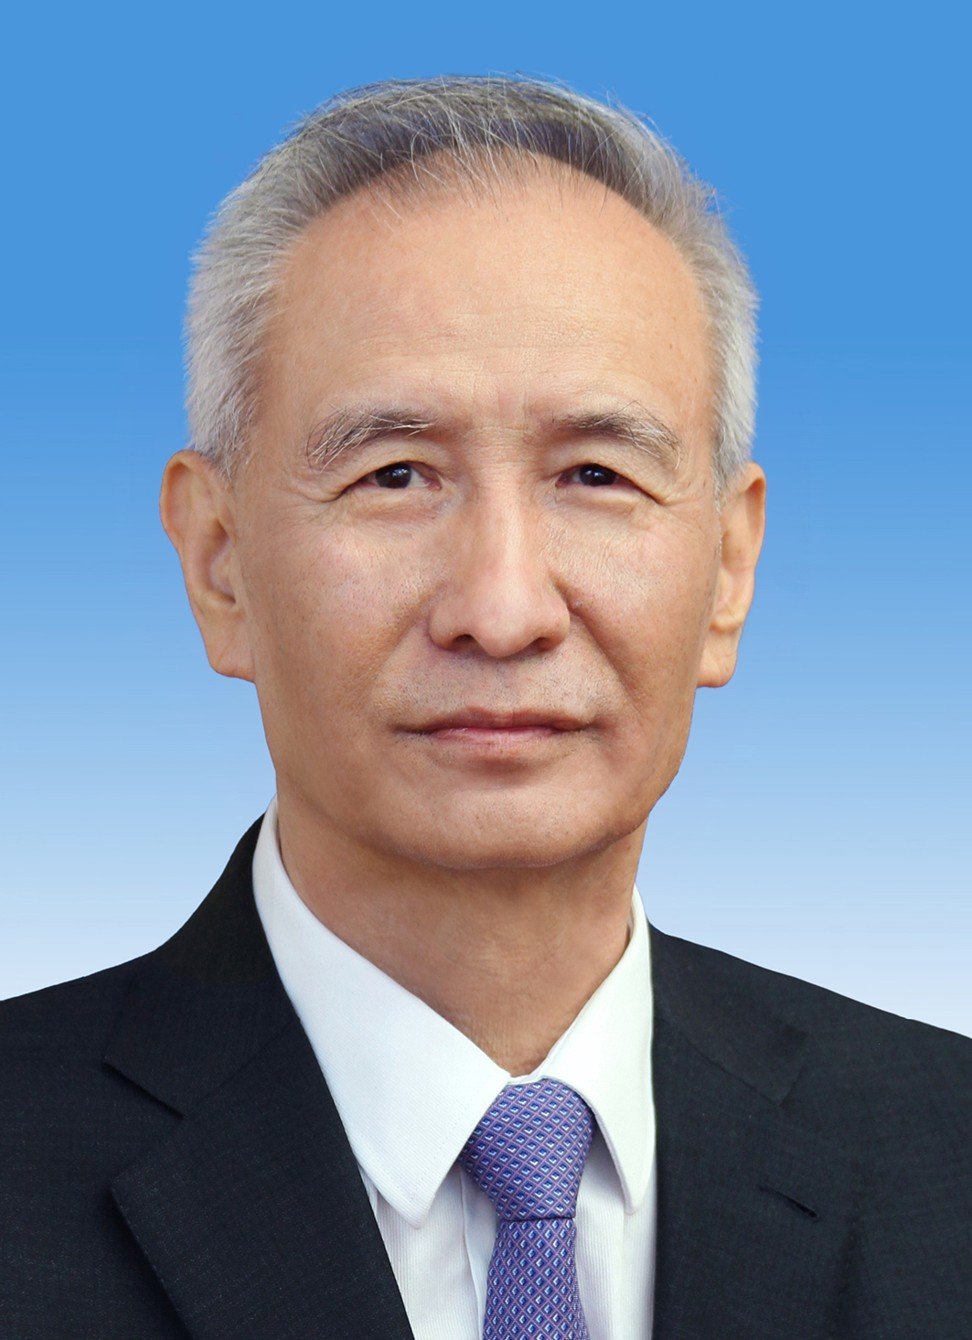 Liu He, President Xi’s economic adviser, 65, is among the new cadres who apparently do not mind looking a little older. Photo: Xinhua